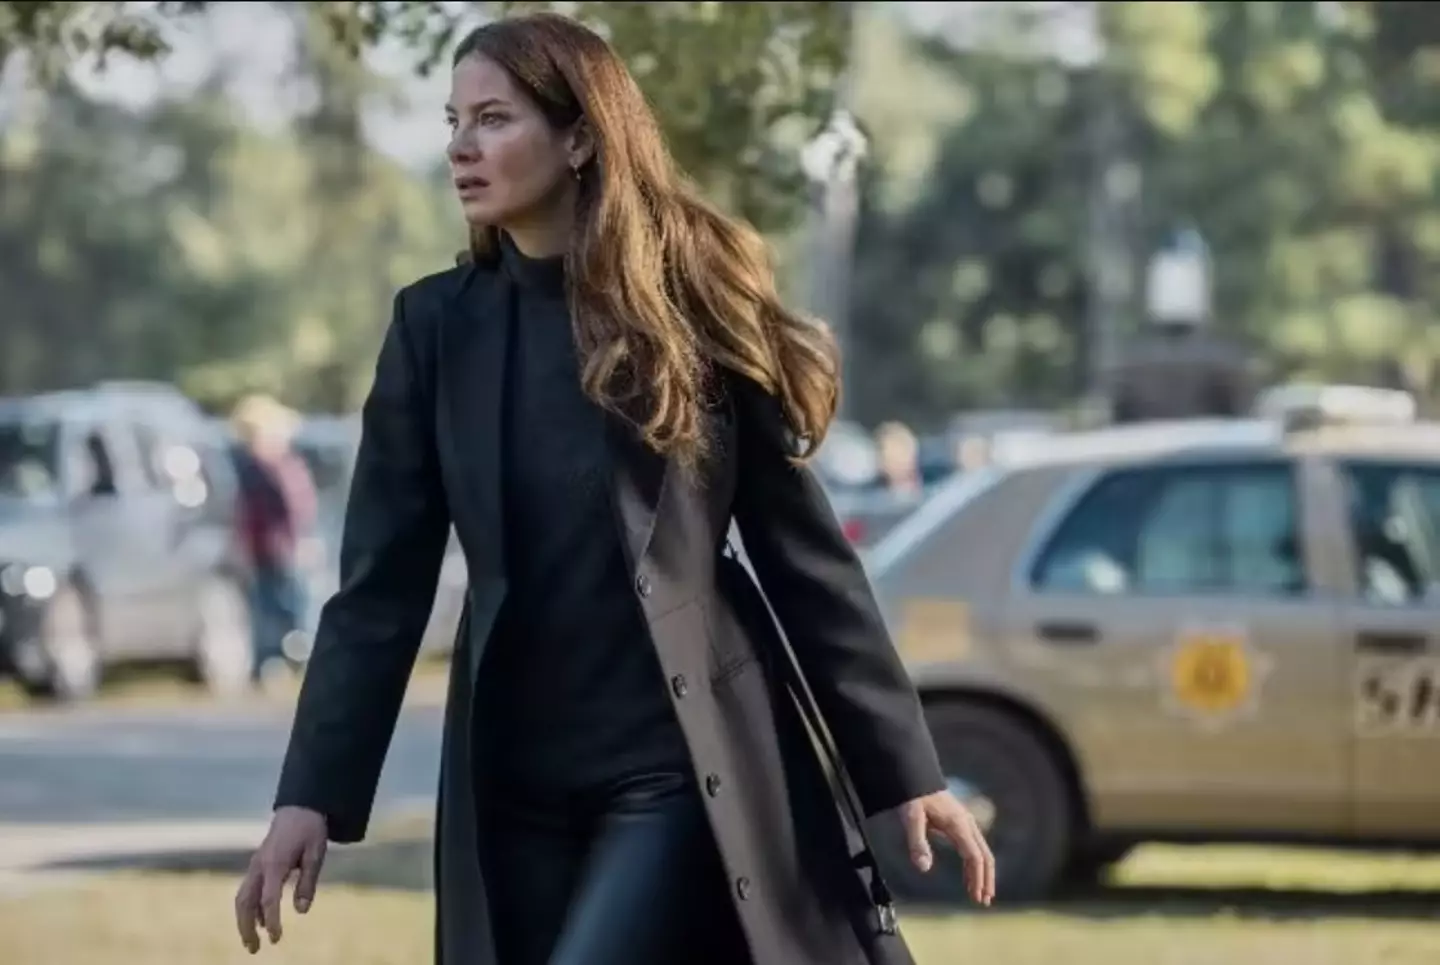 Netflix viewers aren't totally impressed by new series Echoes starring Michelle Monaghan.